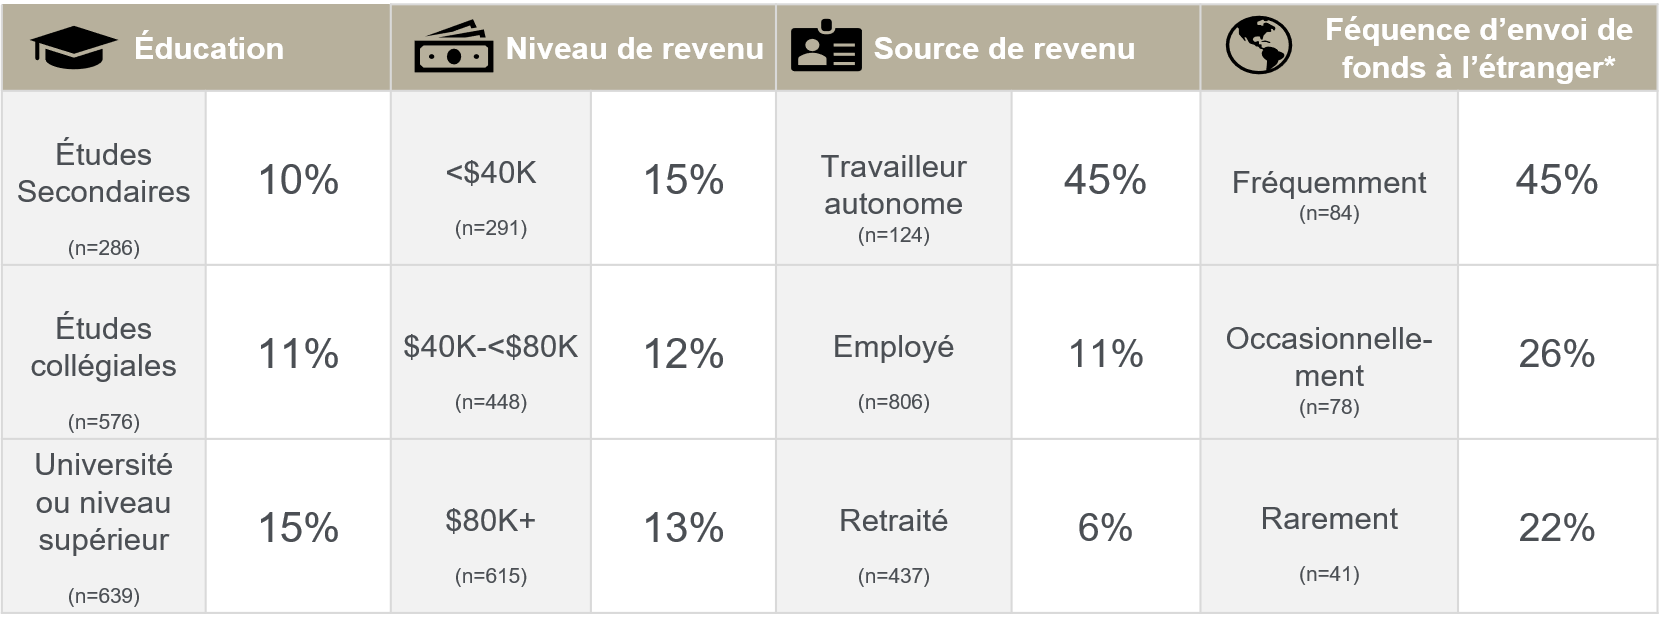 profile_of_gig_workers_-_education_and_income_french_0.png